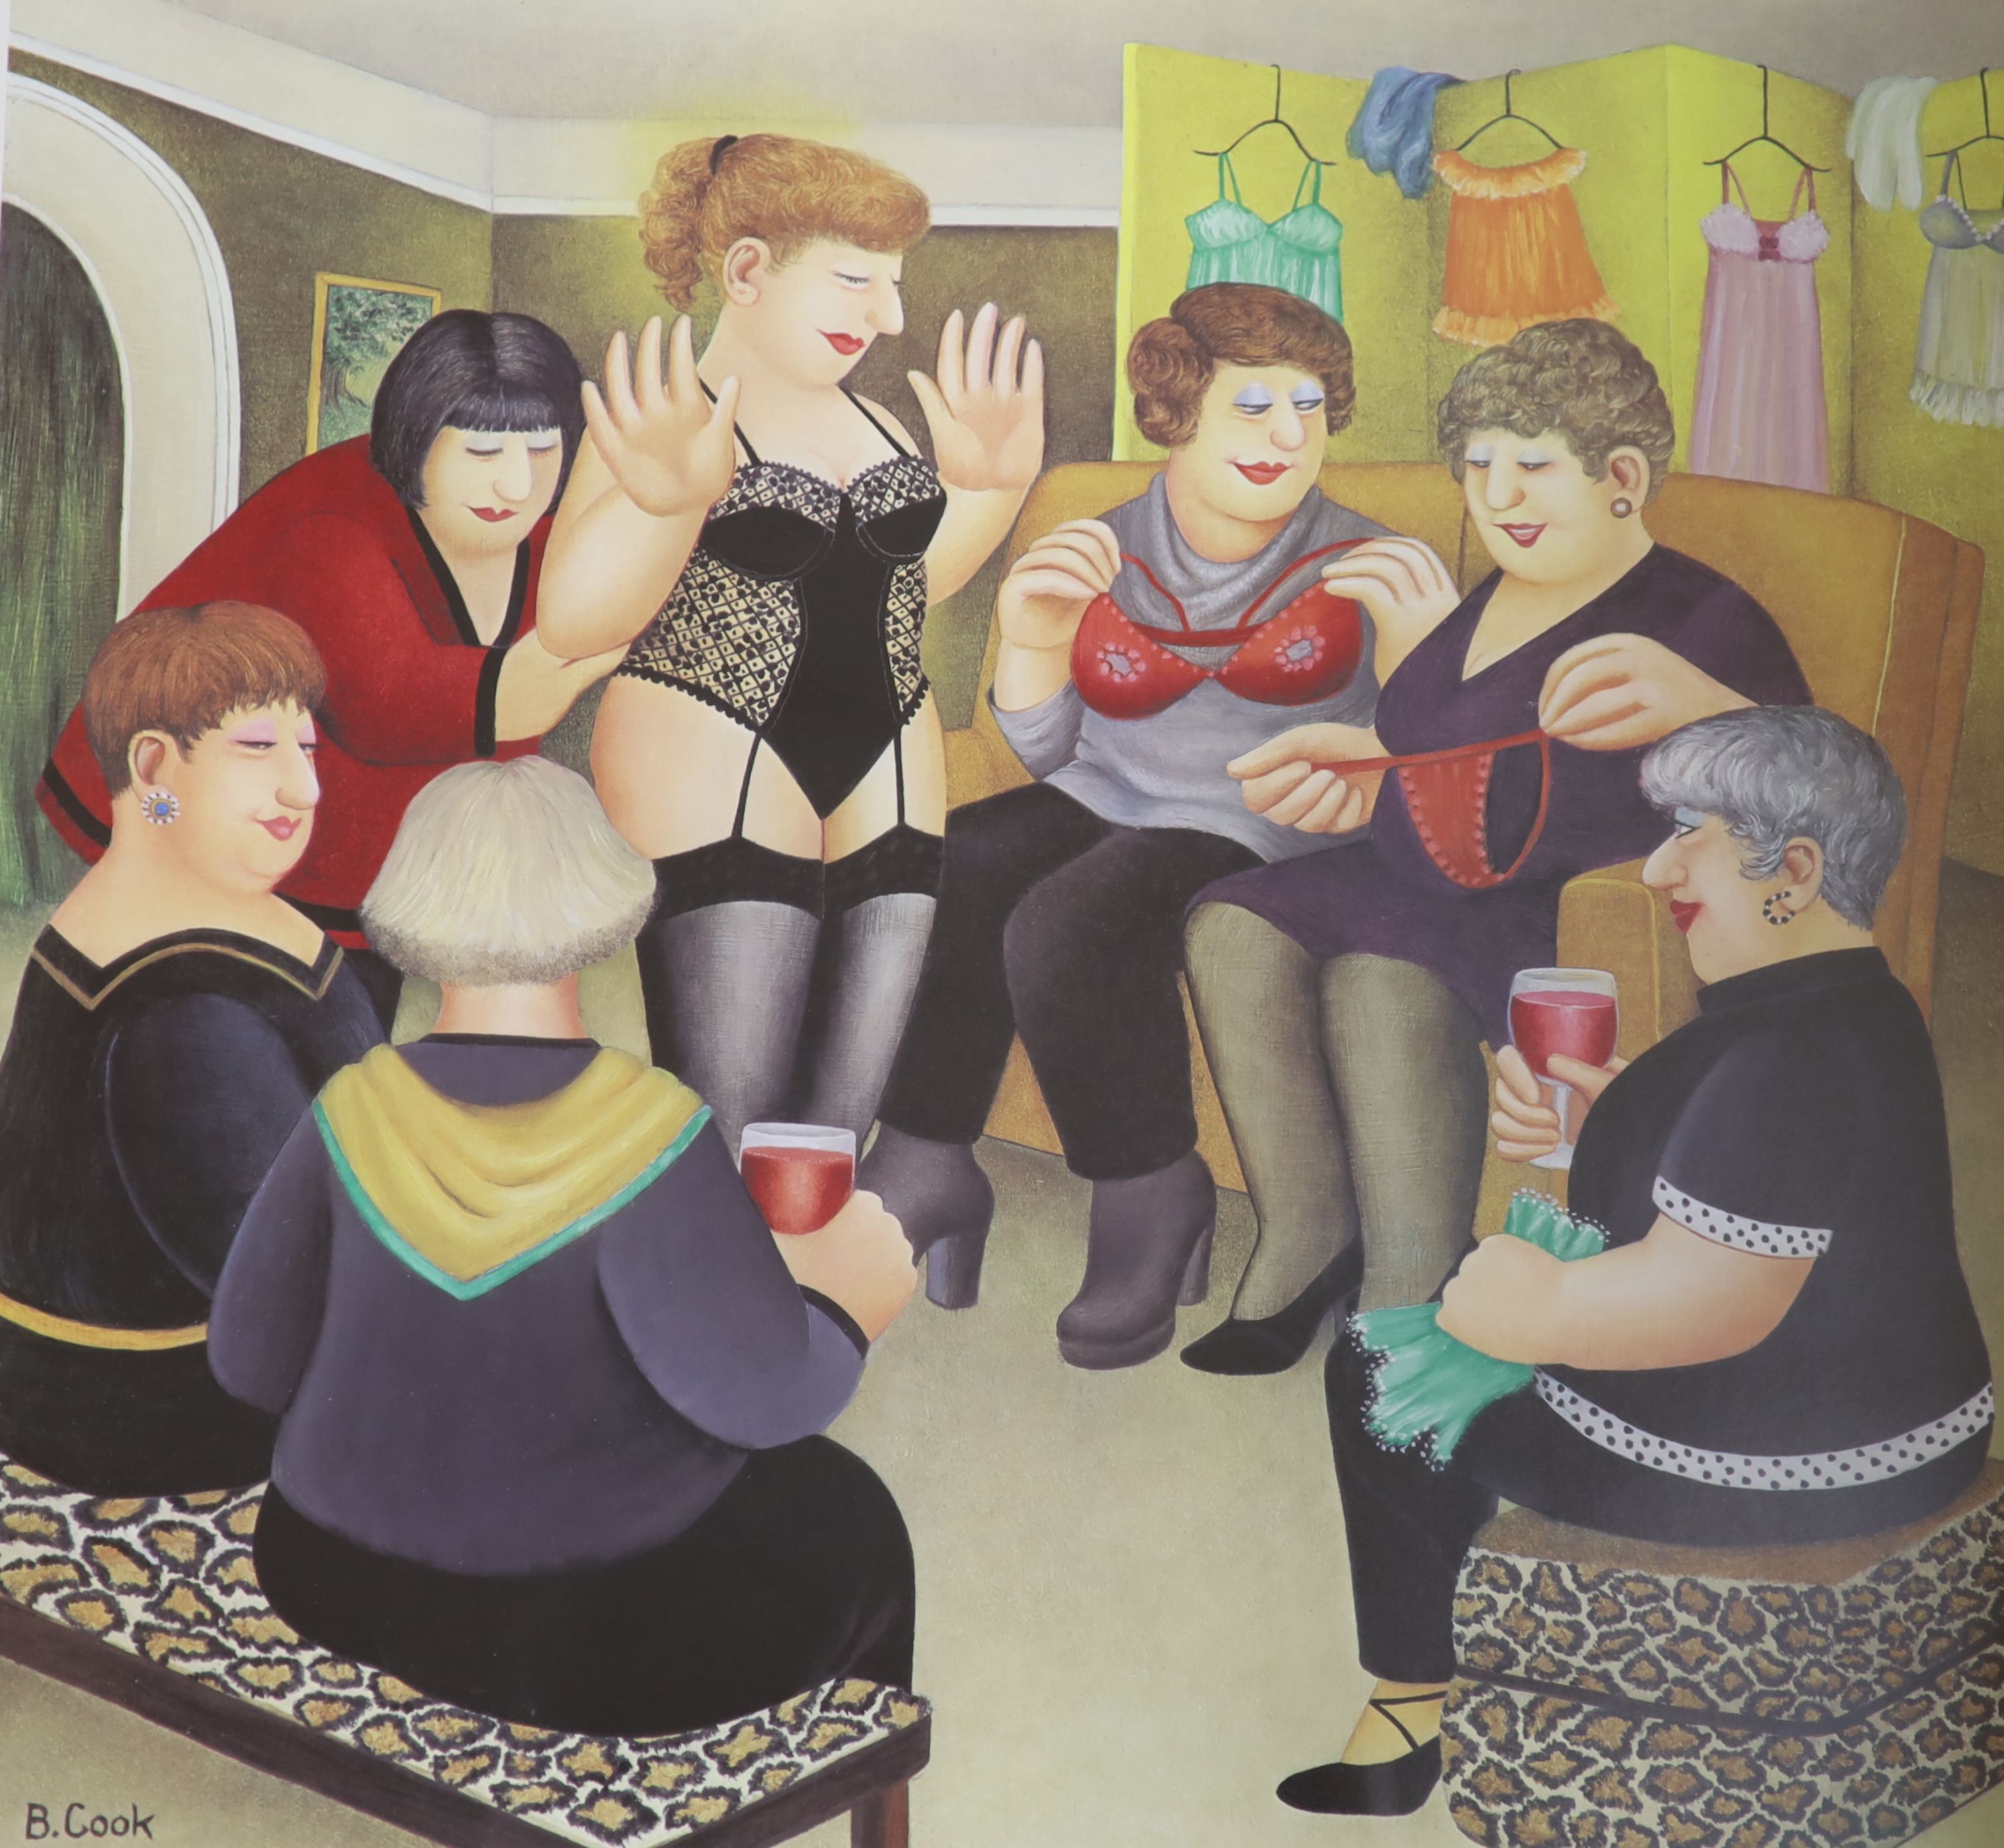 Beryl Cook, limited edition print, 'Party Girls', signed, 90/650, 53 x 56cm